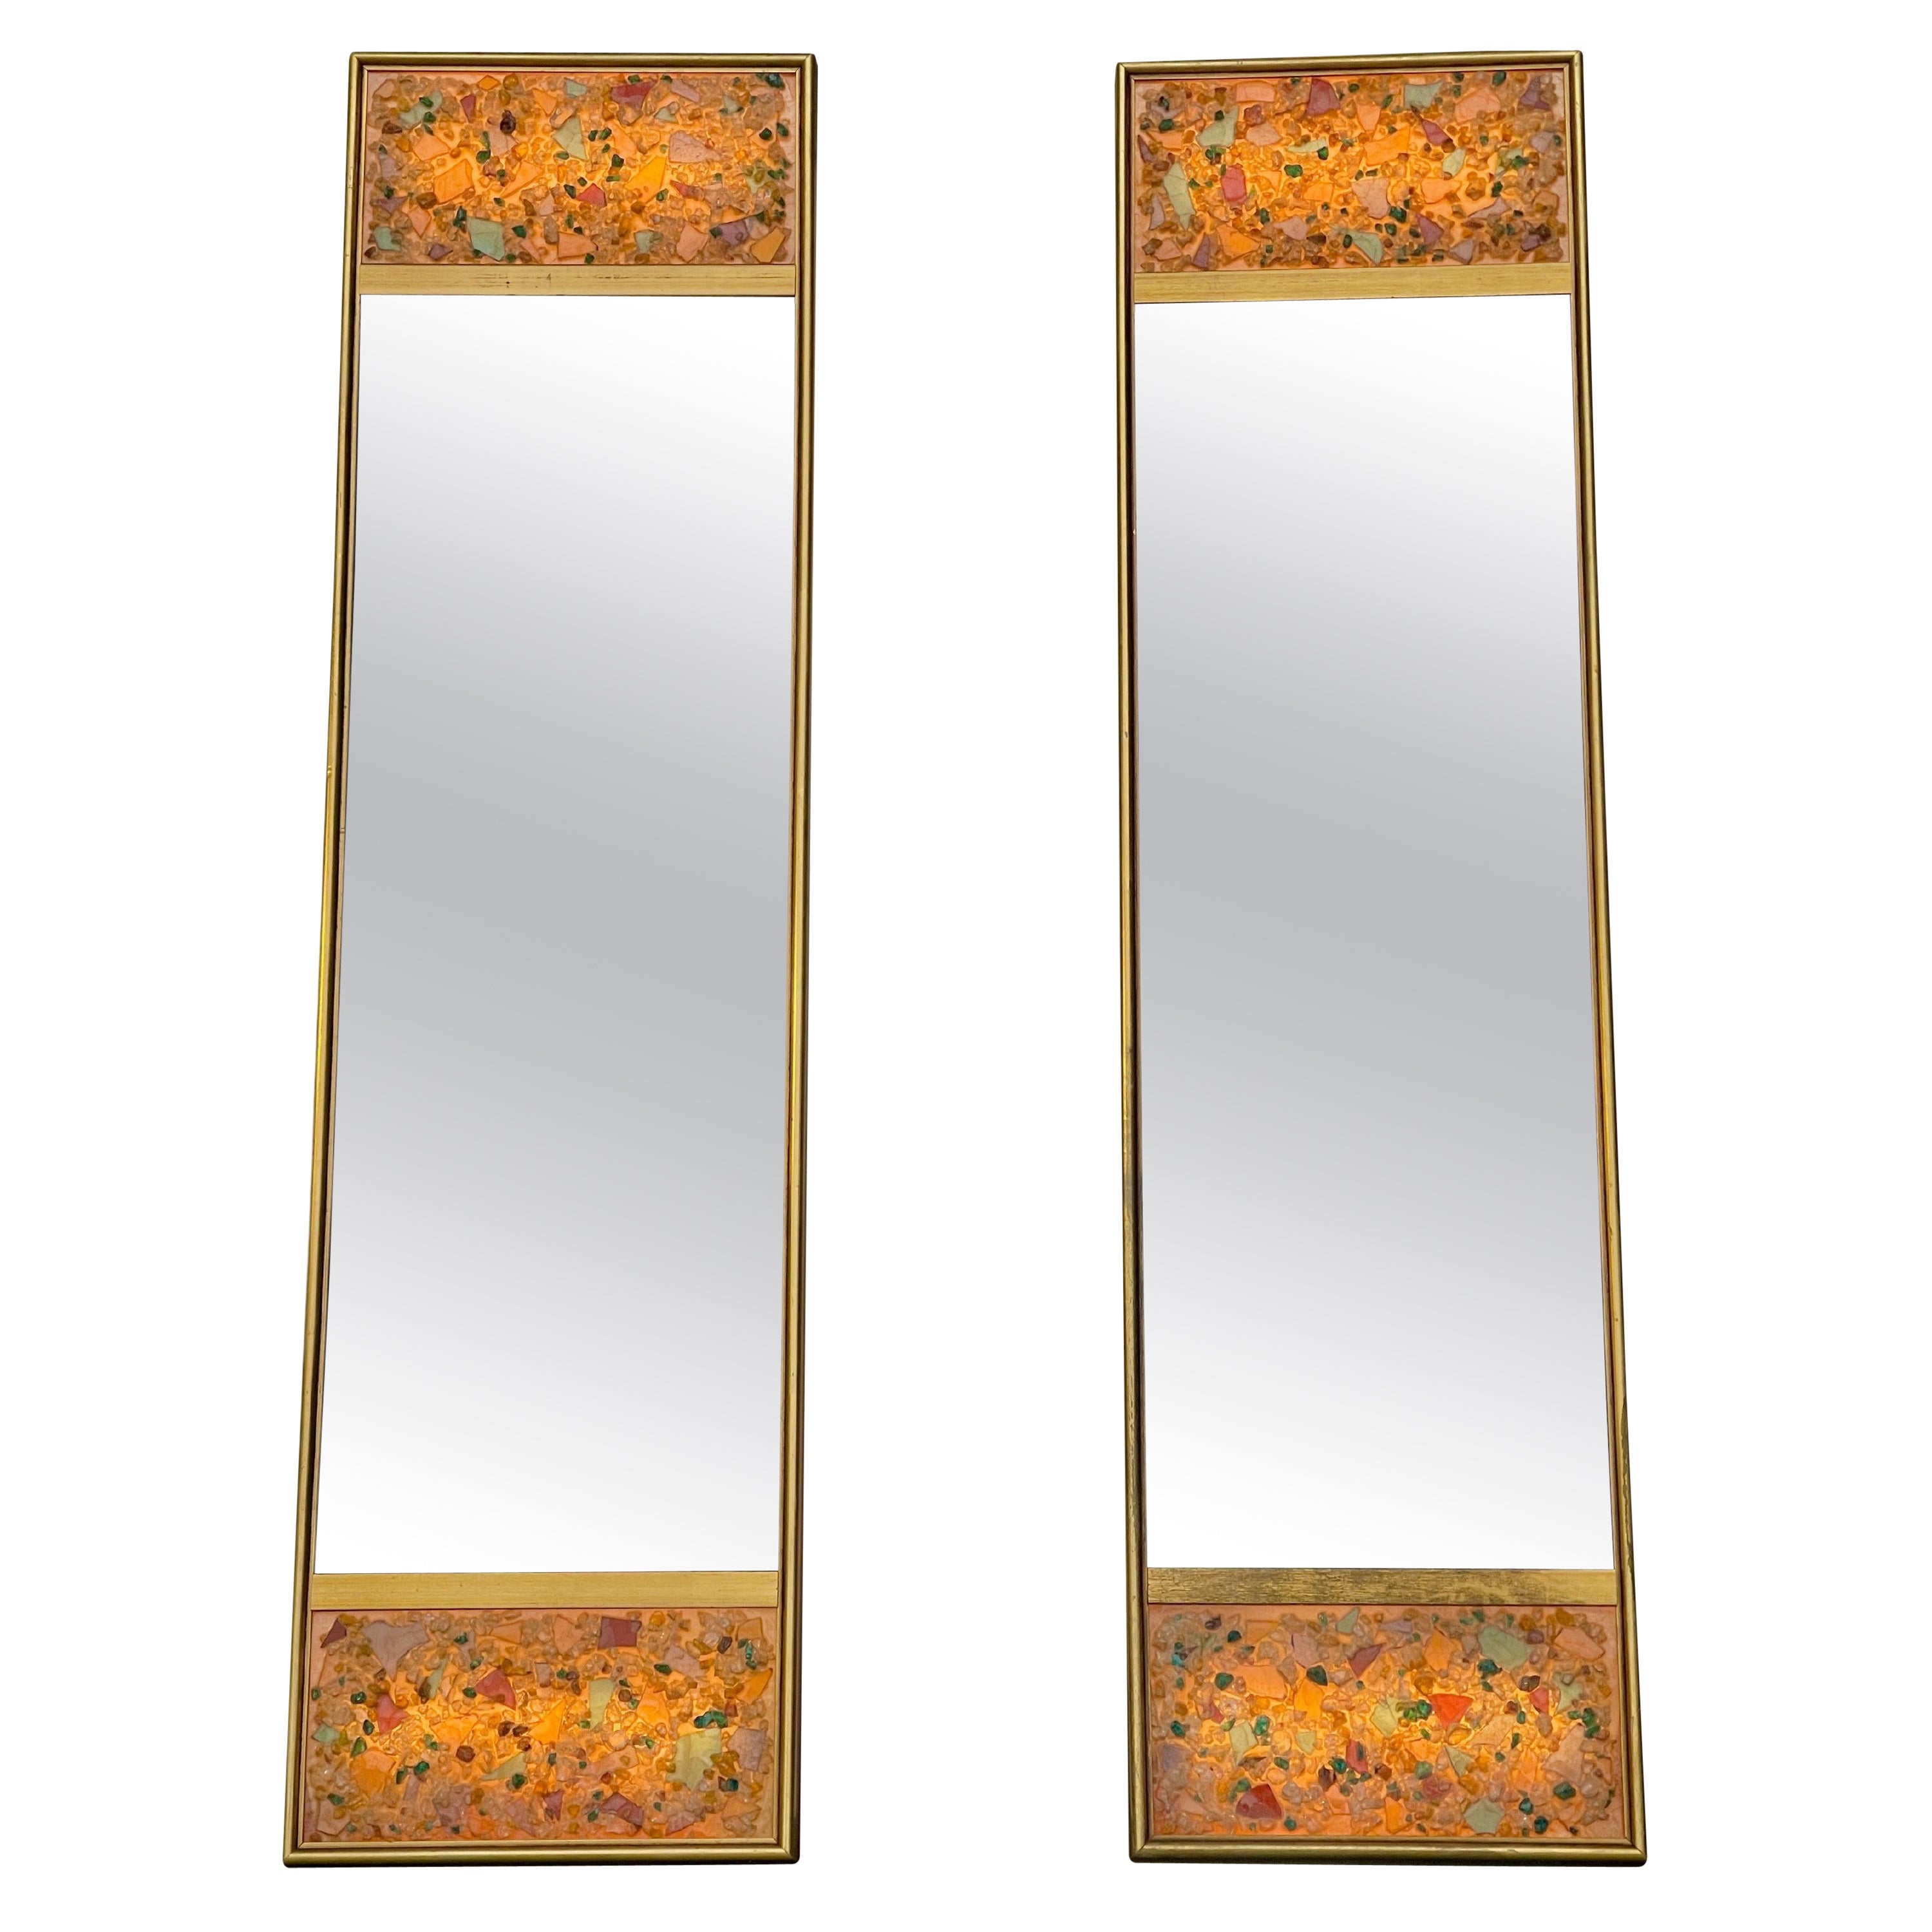 Pair of Illuminated Gilt Mirrors with Crushed Chunk Resin Cullet